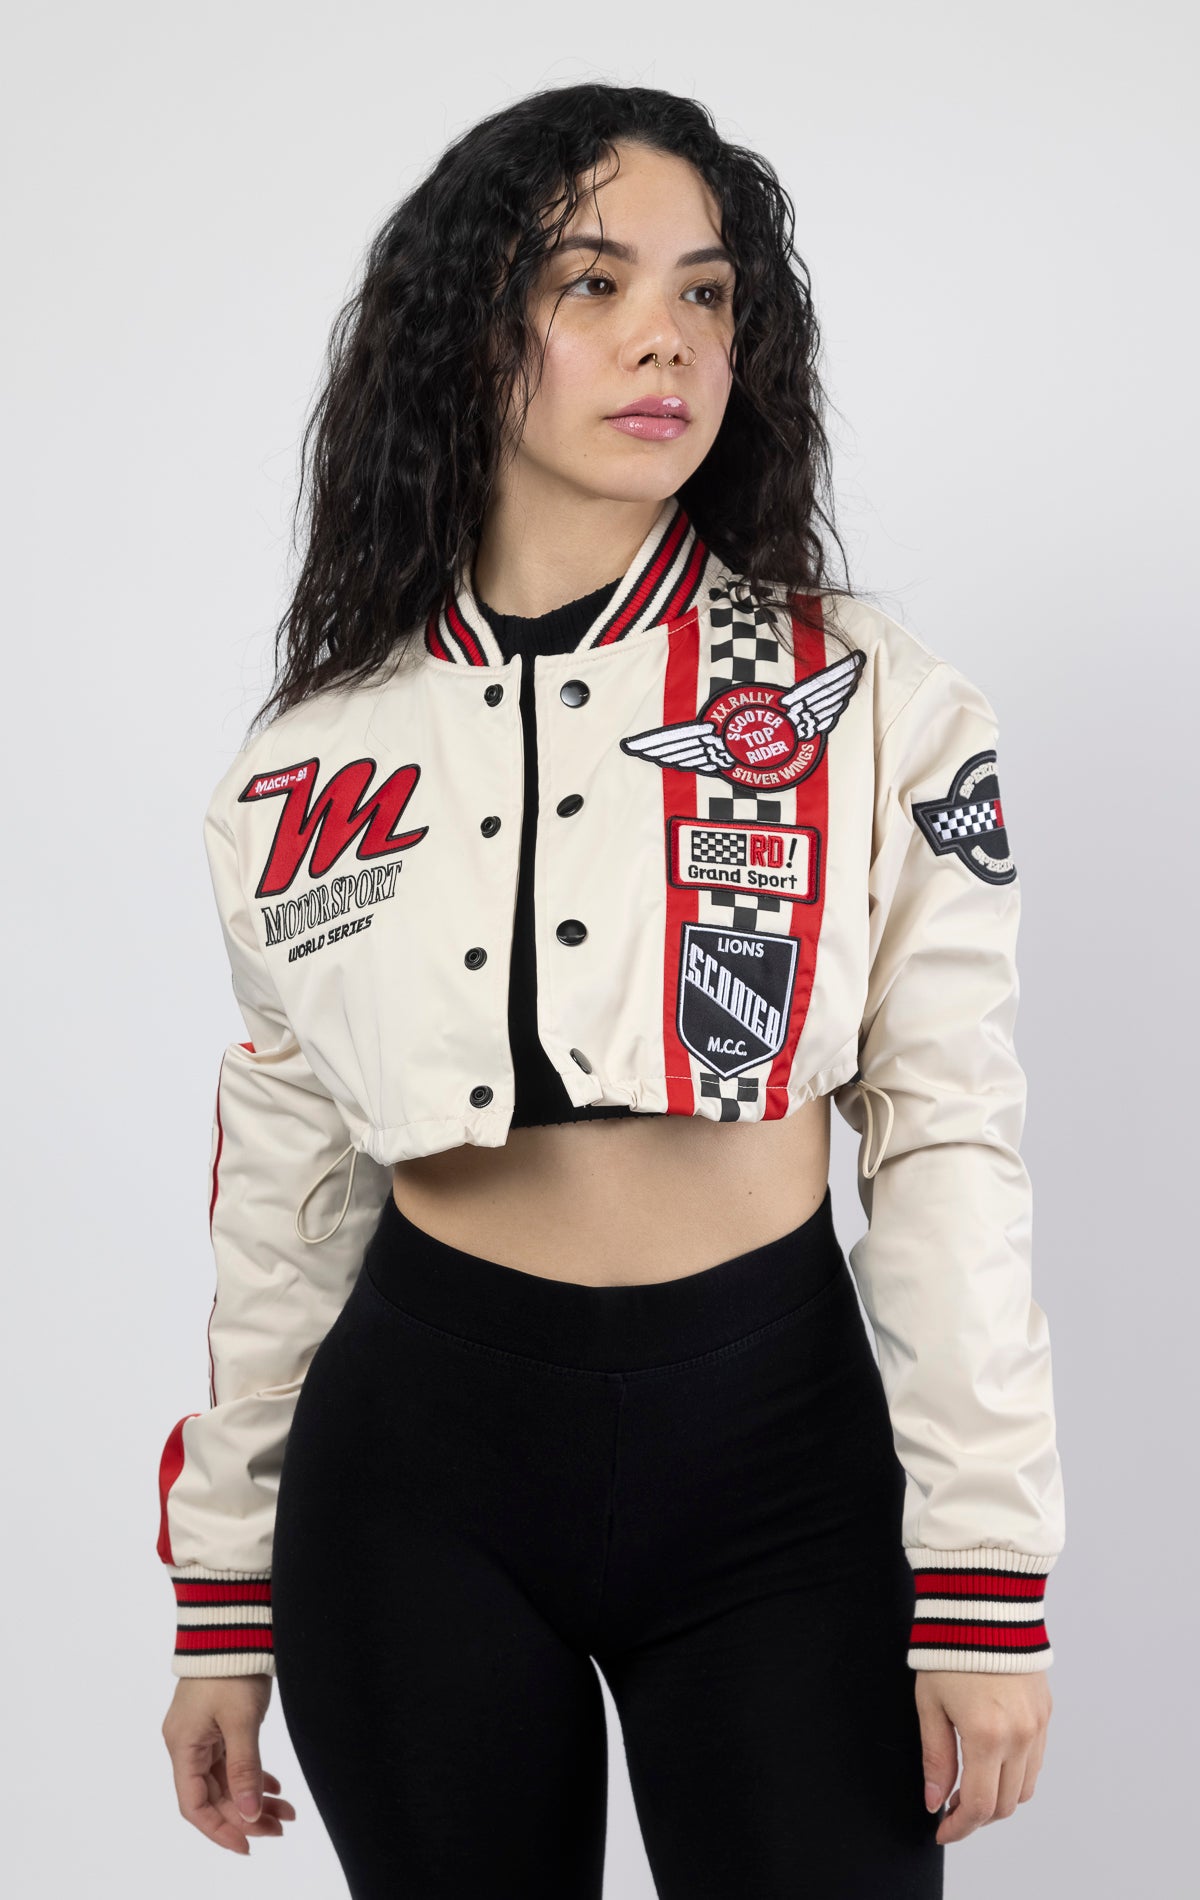 High-performance cropped jacket. Made with breathable coated polyester in a bold color. Featuring coated snap buttons and a bungee adjustable bottom opening. Quality meets style with multi twill/embroidered patch details.